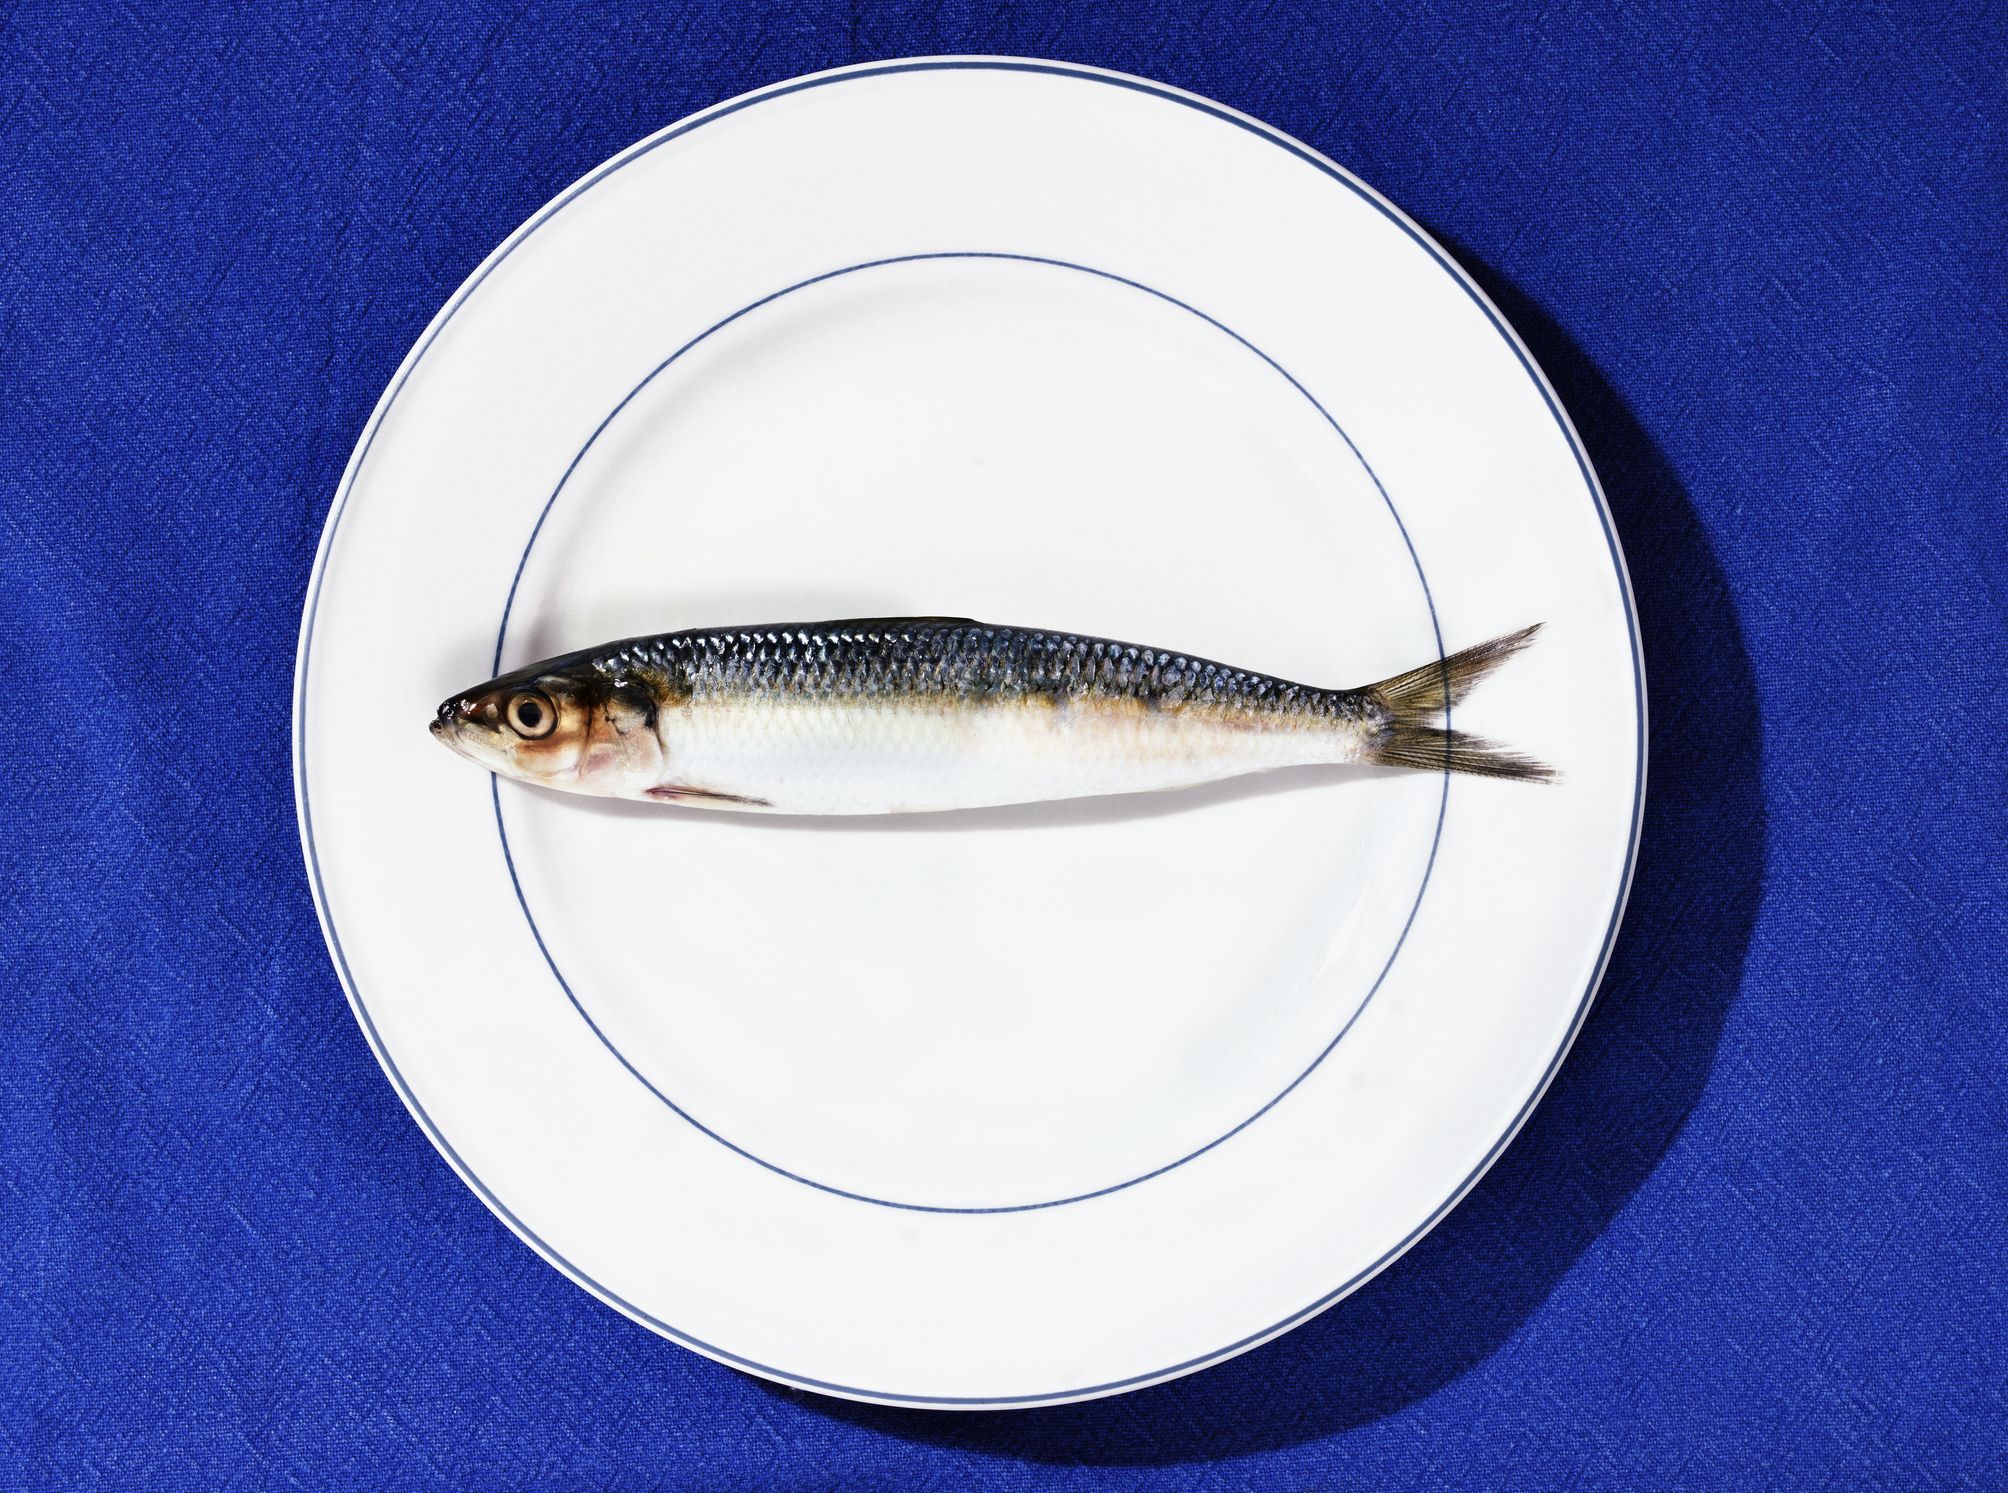 Fish are rich in Vitamin D which may help you manage psoriasis